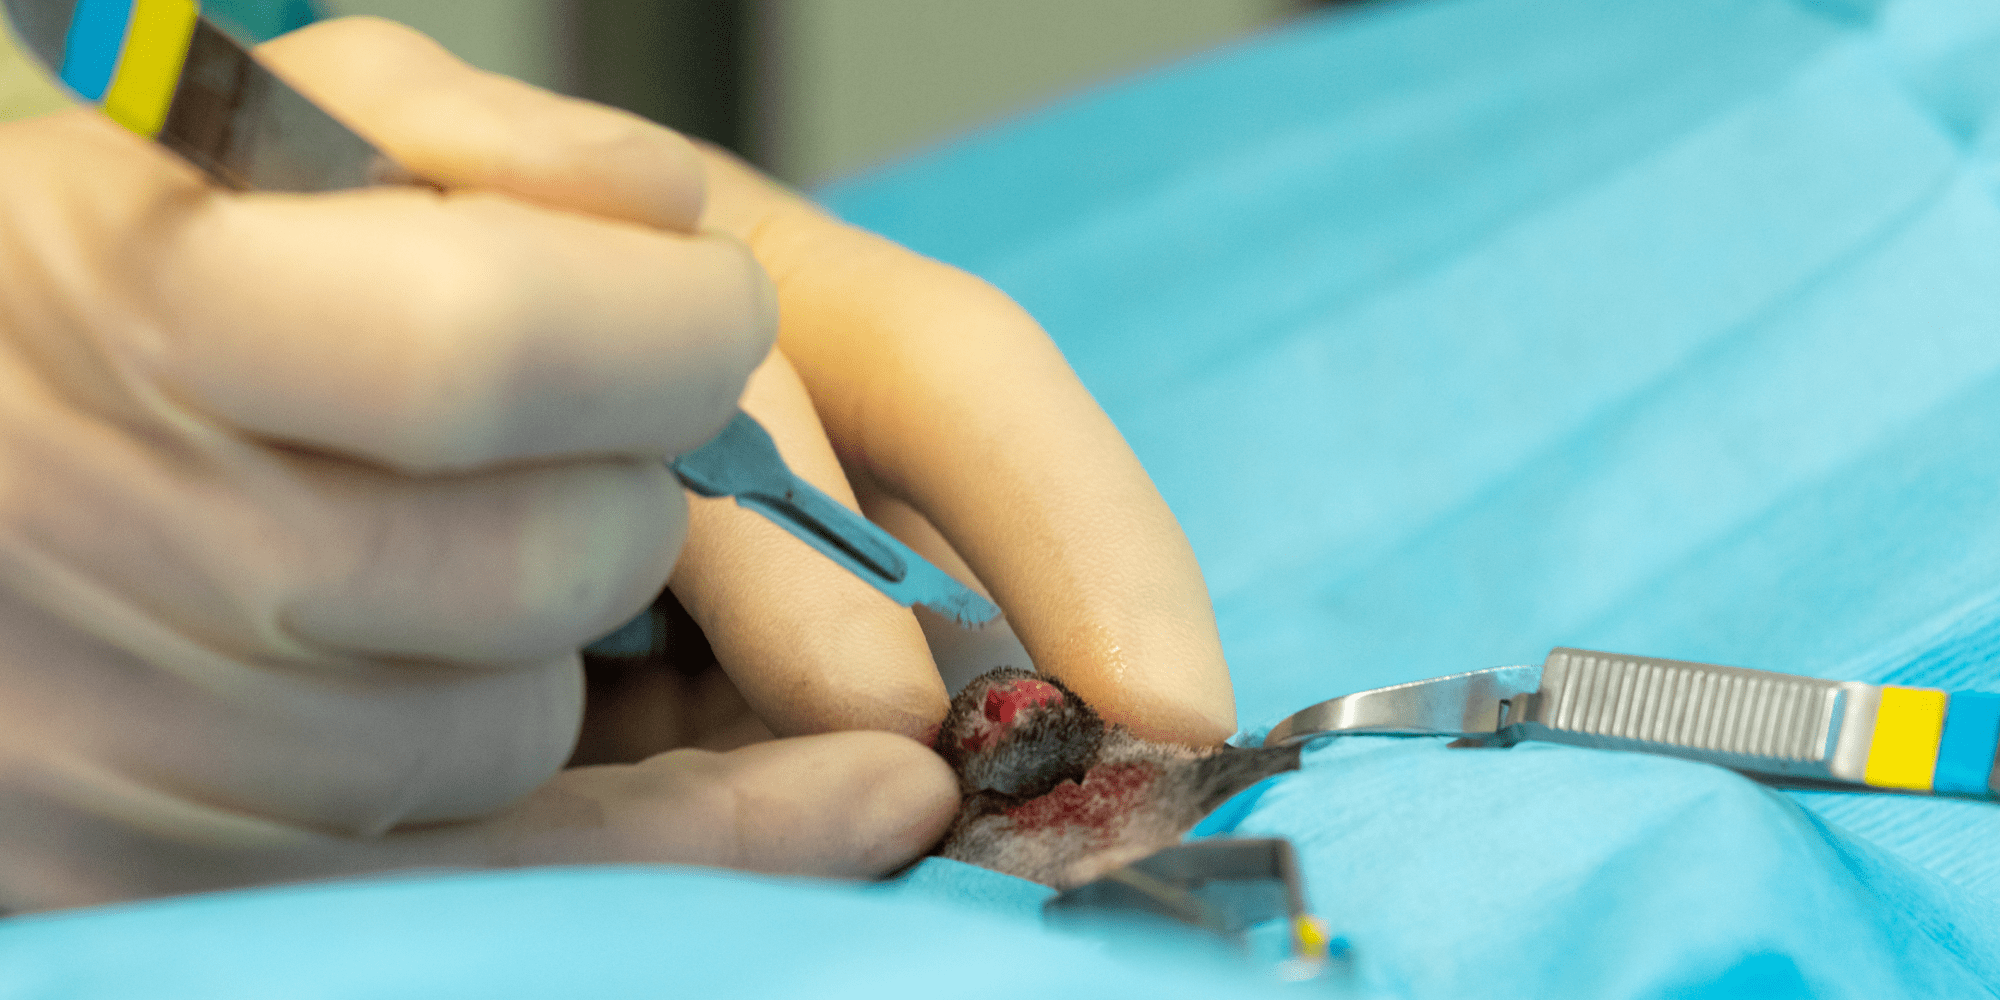 A photo of a cat's lump being operated on